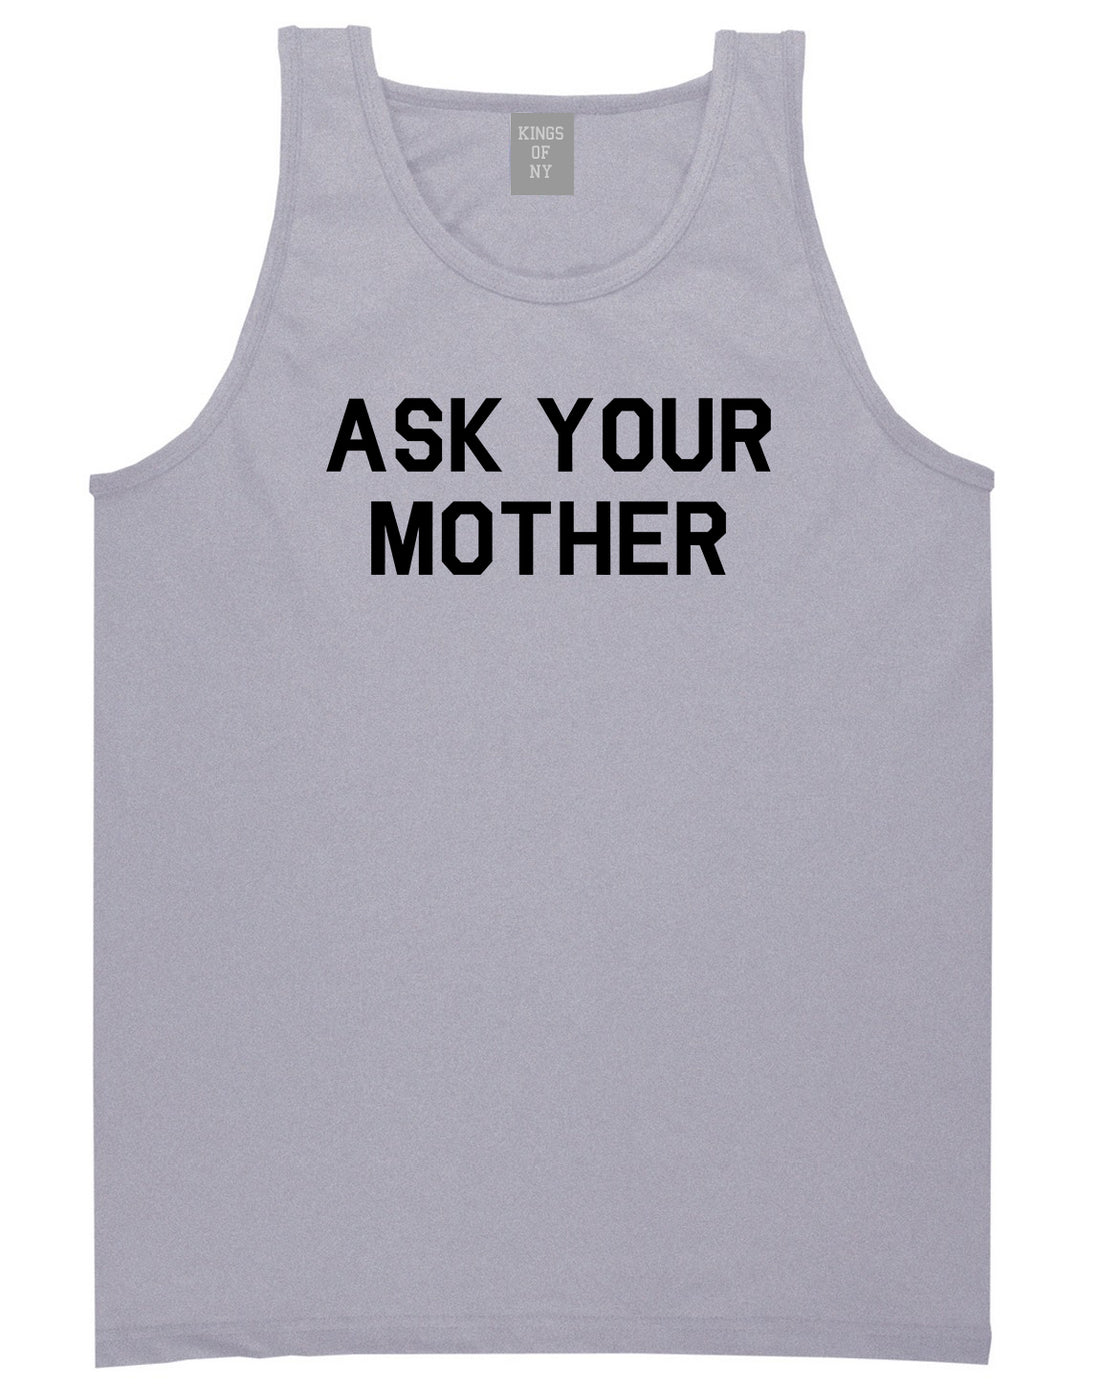 Ask Your Mother Funny Dad Mens Tank Top Shirt Grey by Kings Of NY